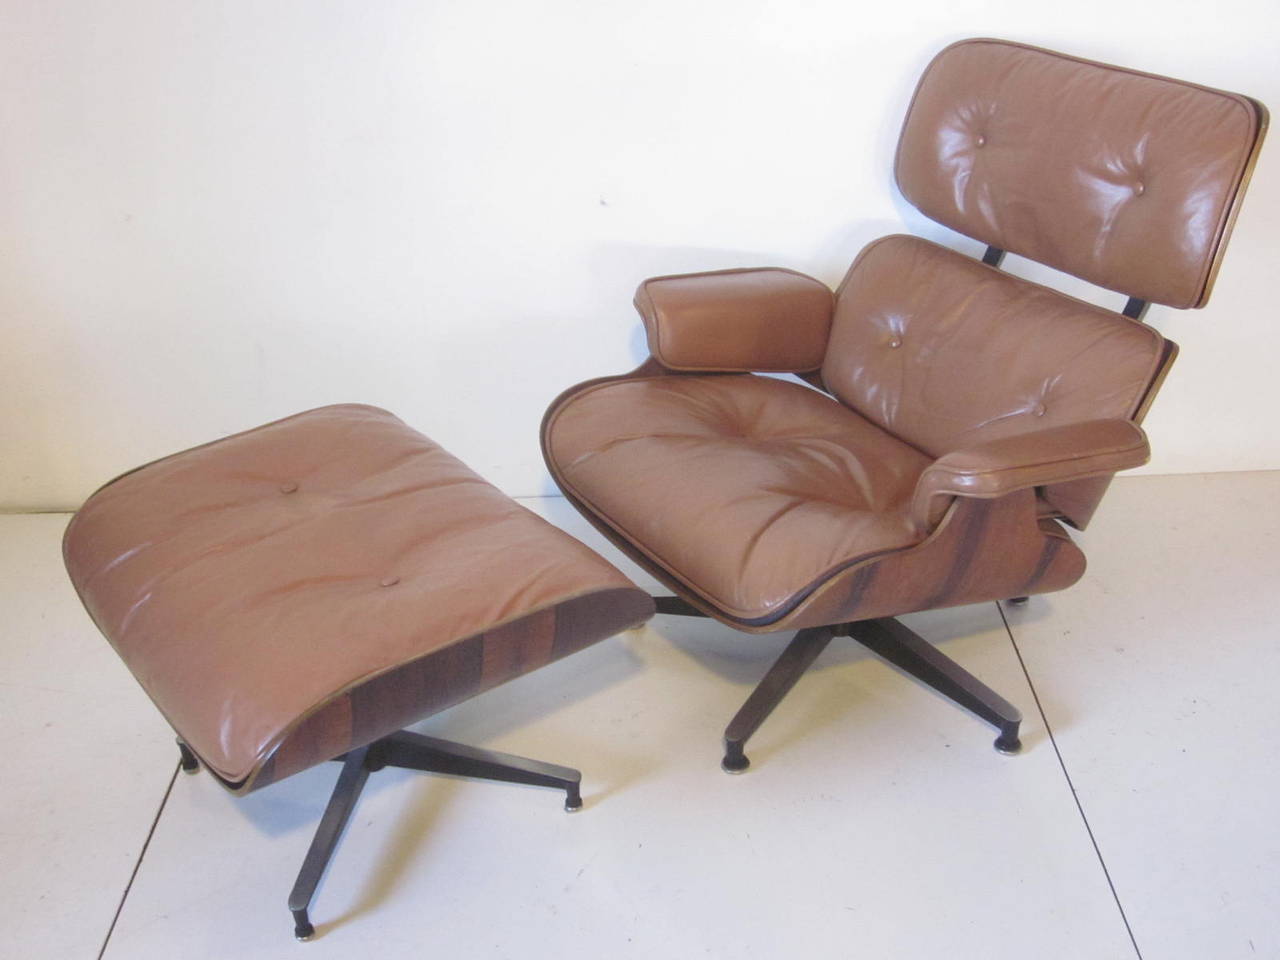 A beautifully grained rich Brazilian rosewood Eames lounge chair with matching ottoman and custom ordered saddle tan colored leather cushions. This swiveling chair with ottoman sits on cast aluminum bases. Retains the original manufactures labels